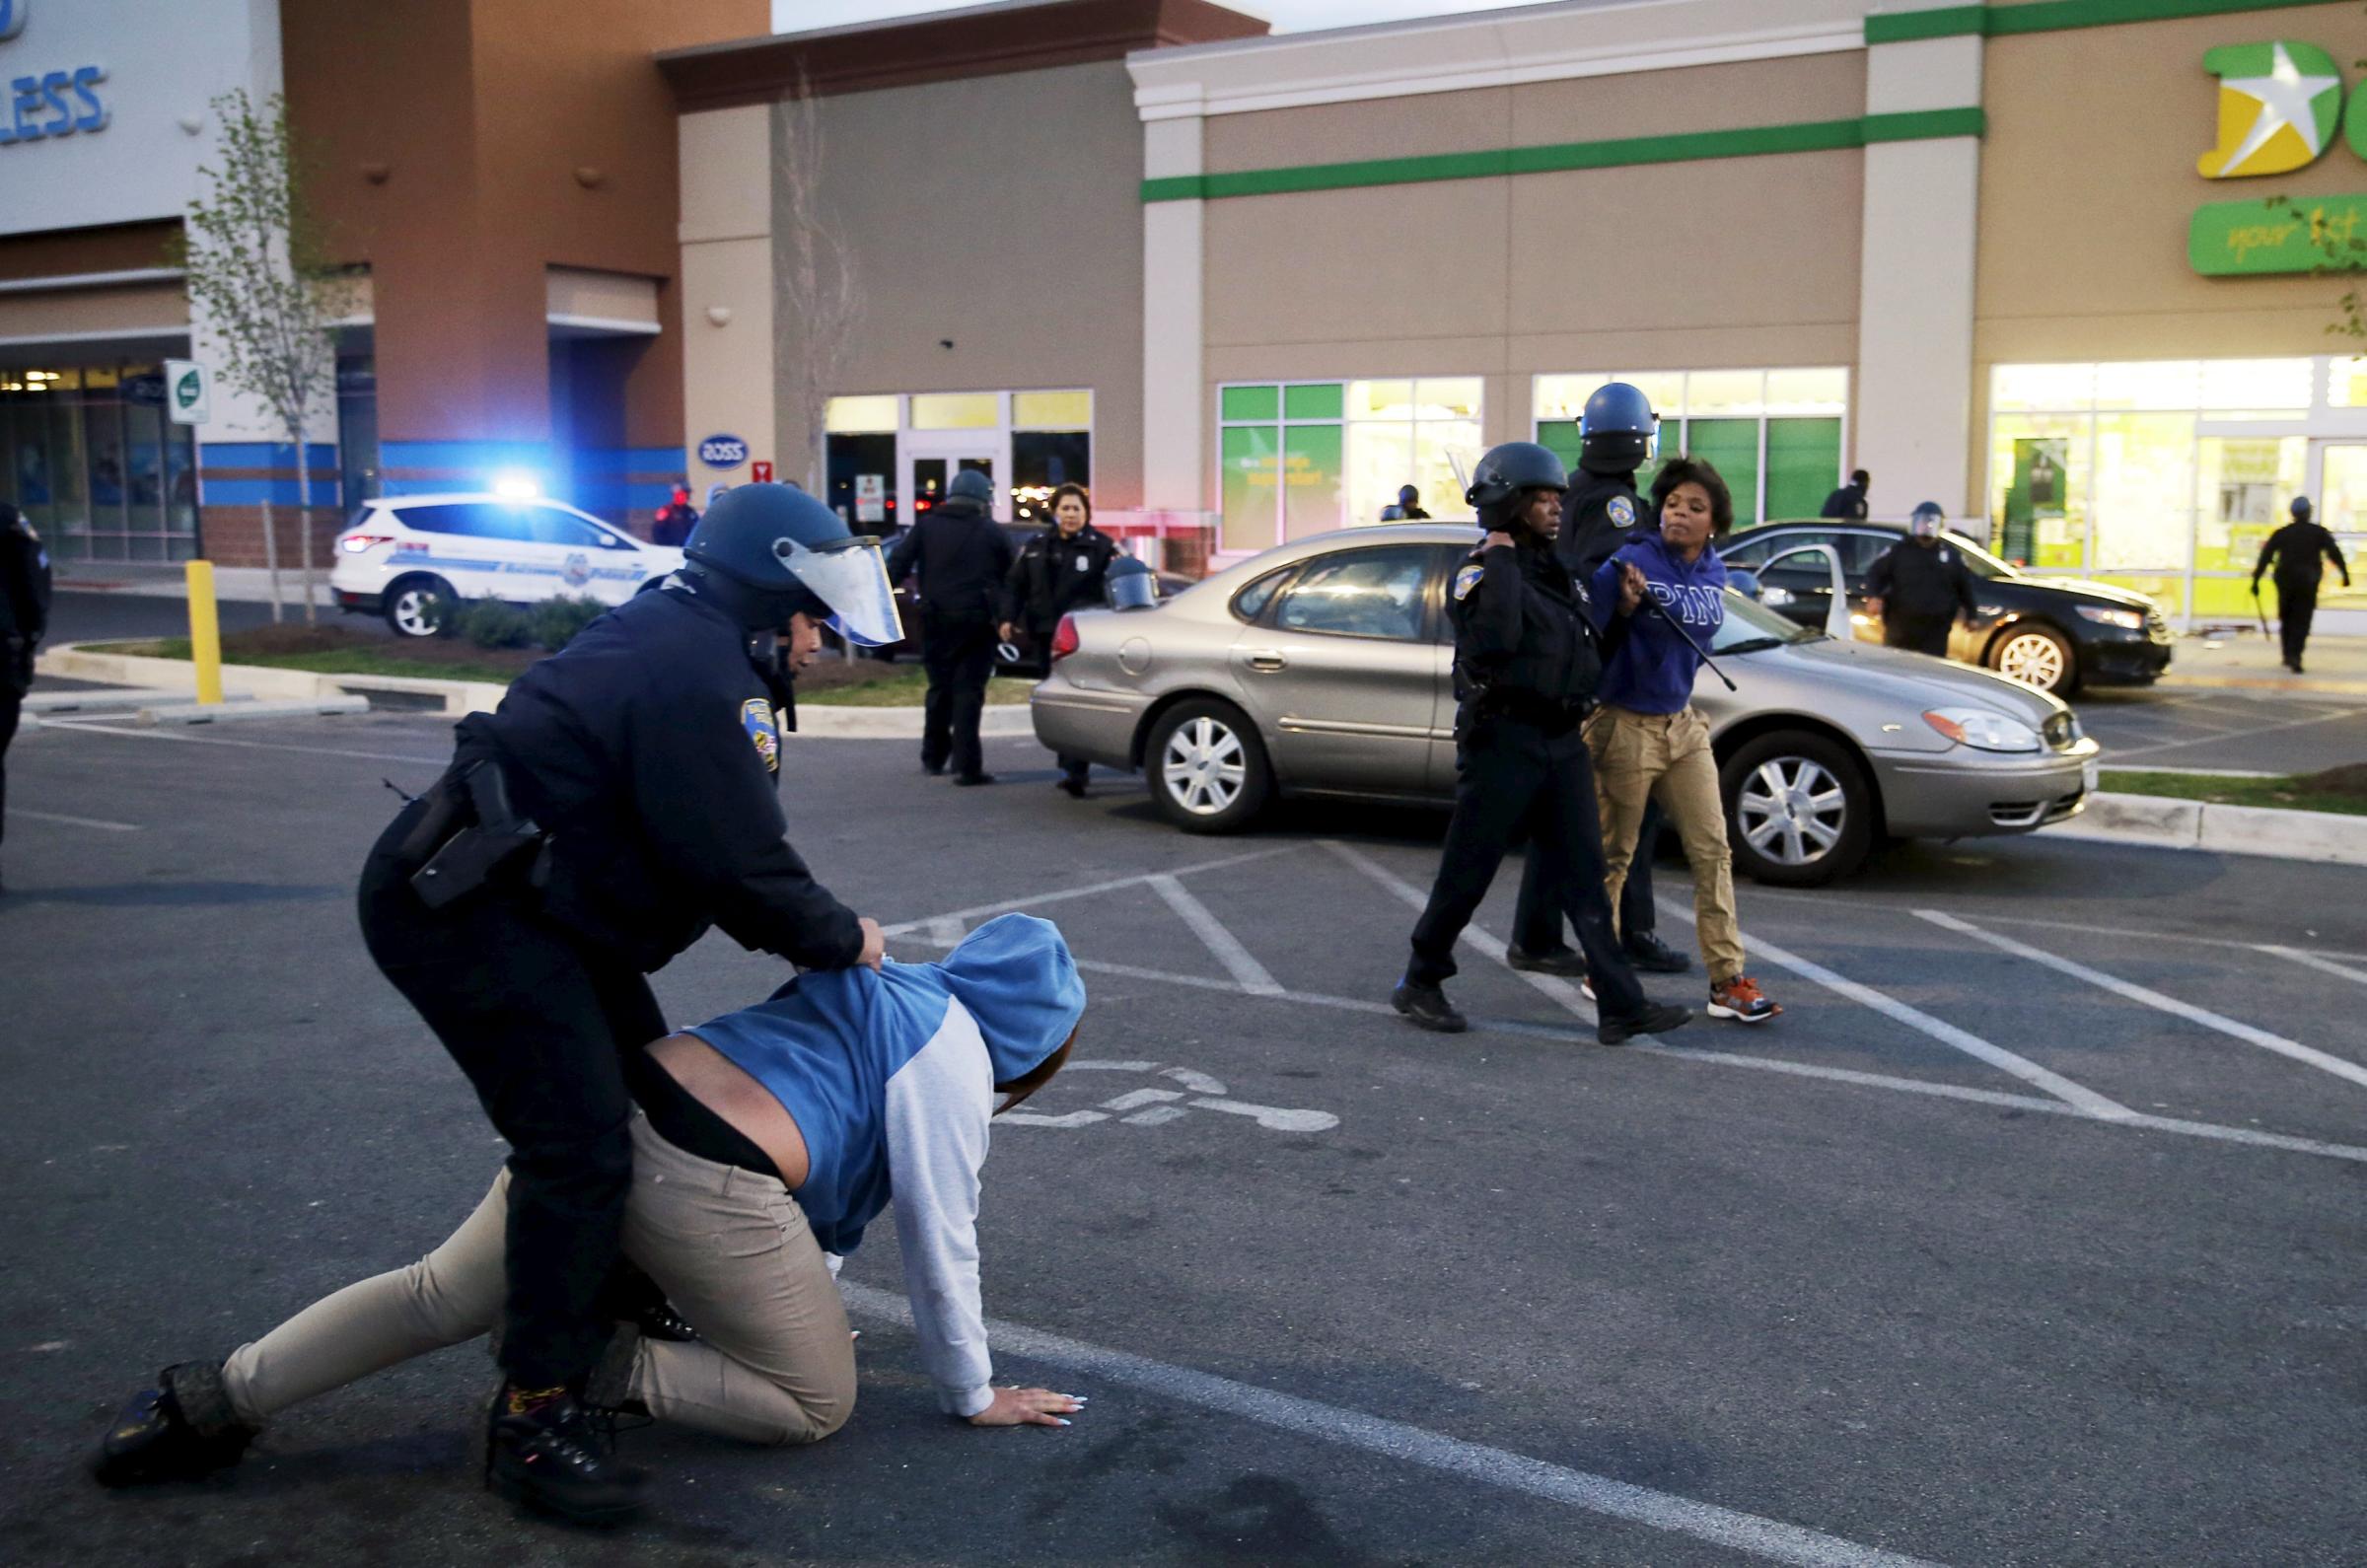 Baltimore police officers tackle and arrest looters after they emerged from a "Deals" store with merchandise during clashes between rioters and police in Baltimore